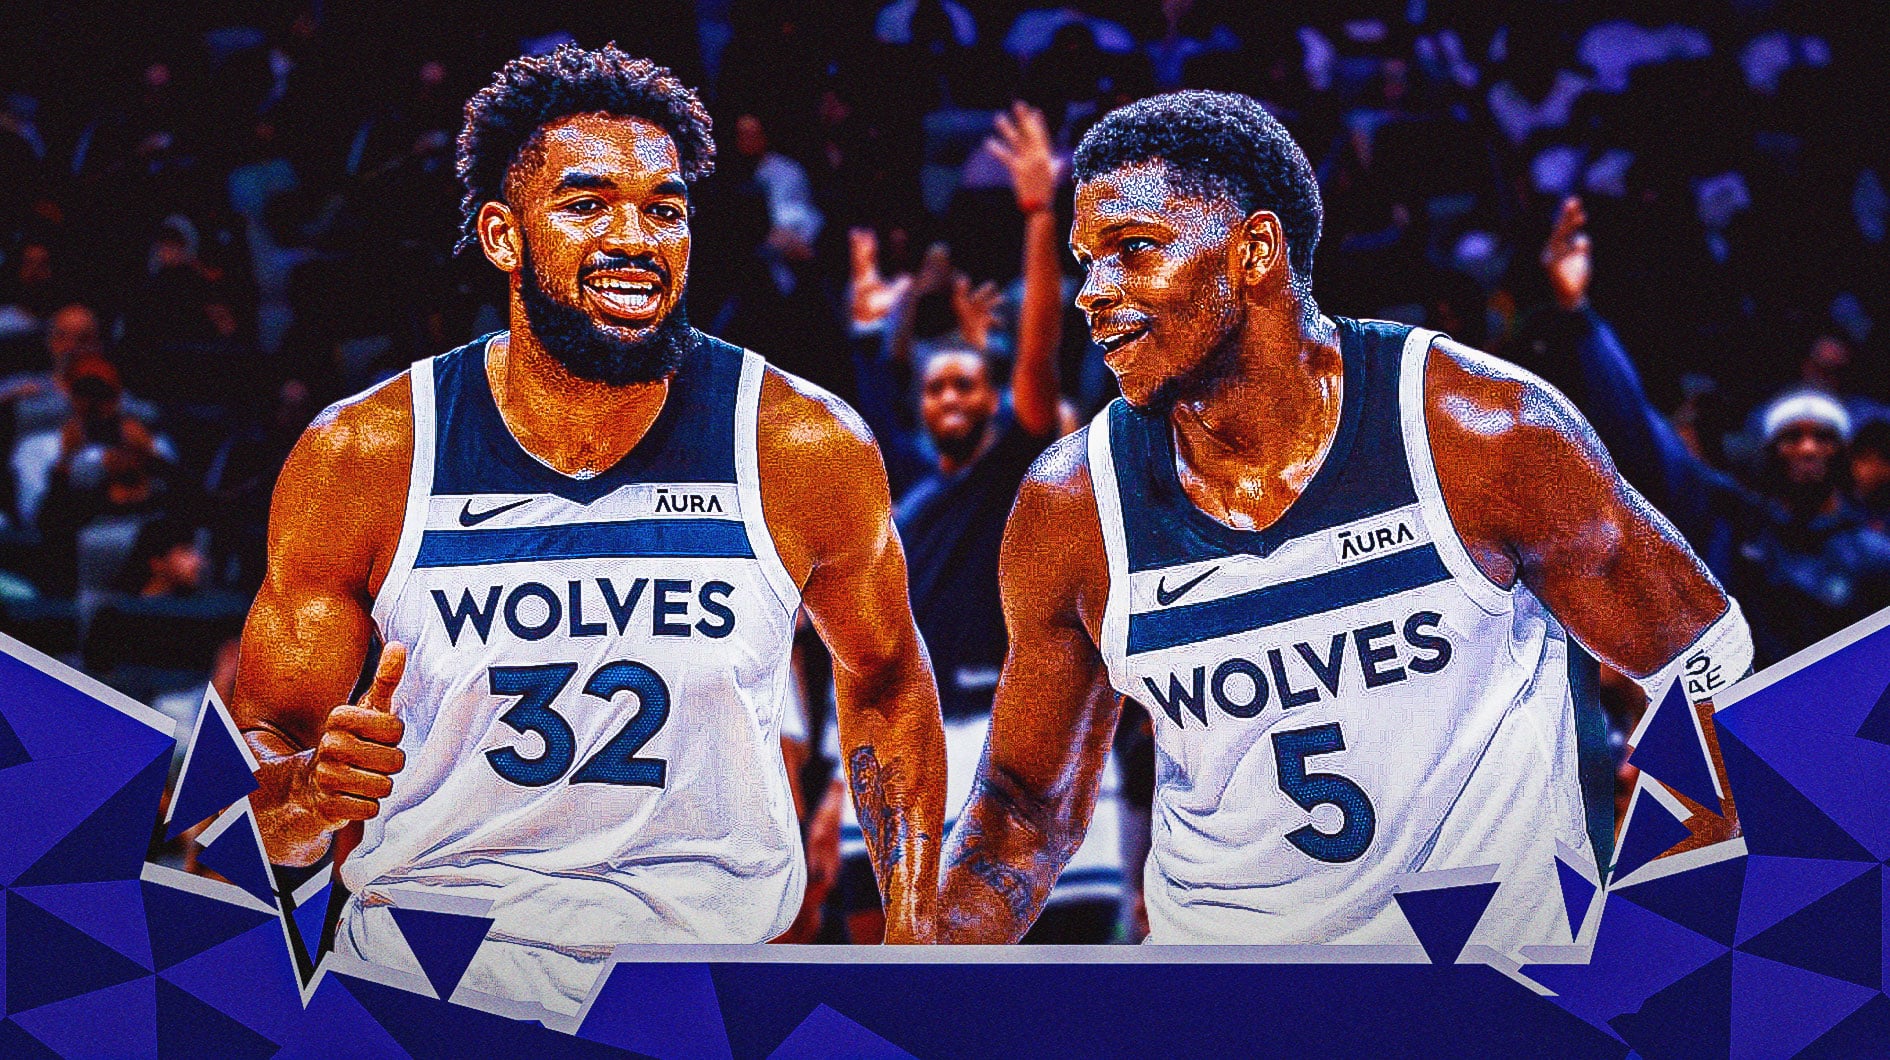 With Anthony Edwards and Karl-Anthony Towns each elevating their games, the Timberwolves have reached the top of the standings 